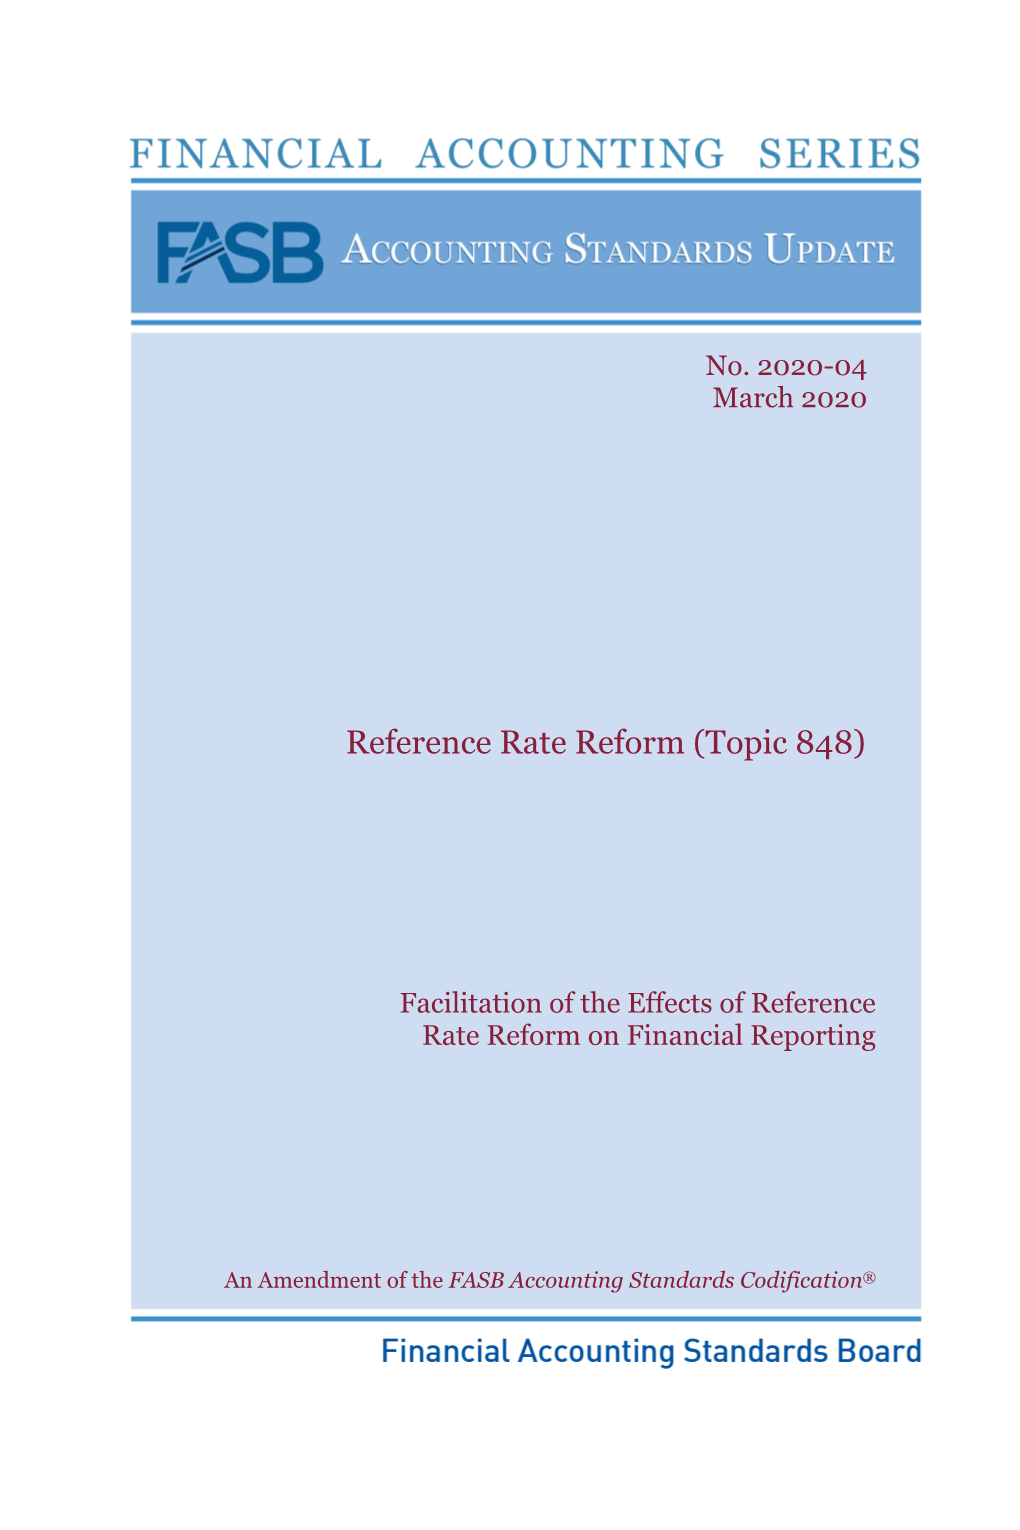 Reference Rate Reform (Topic 848)